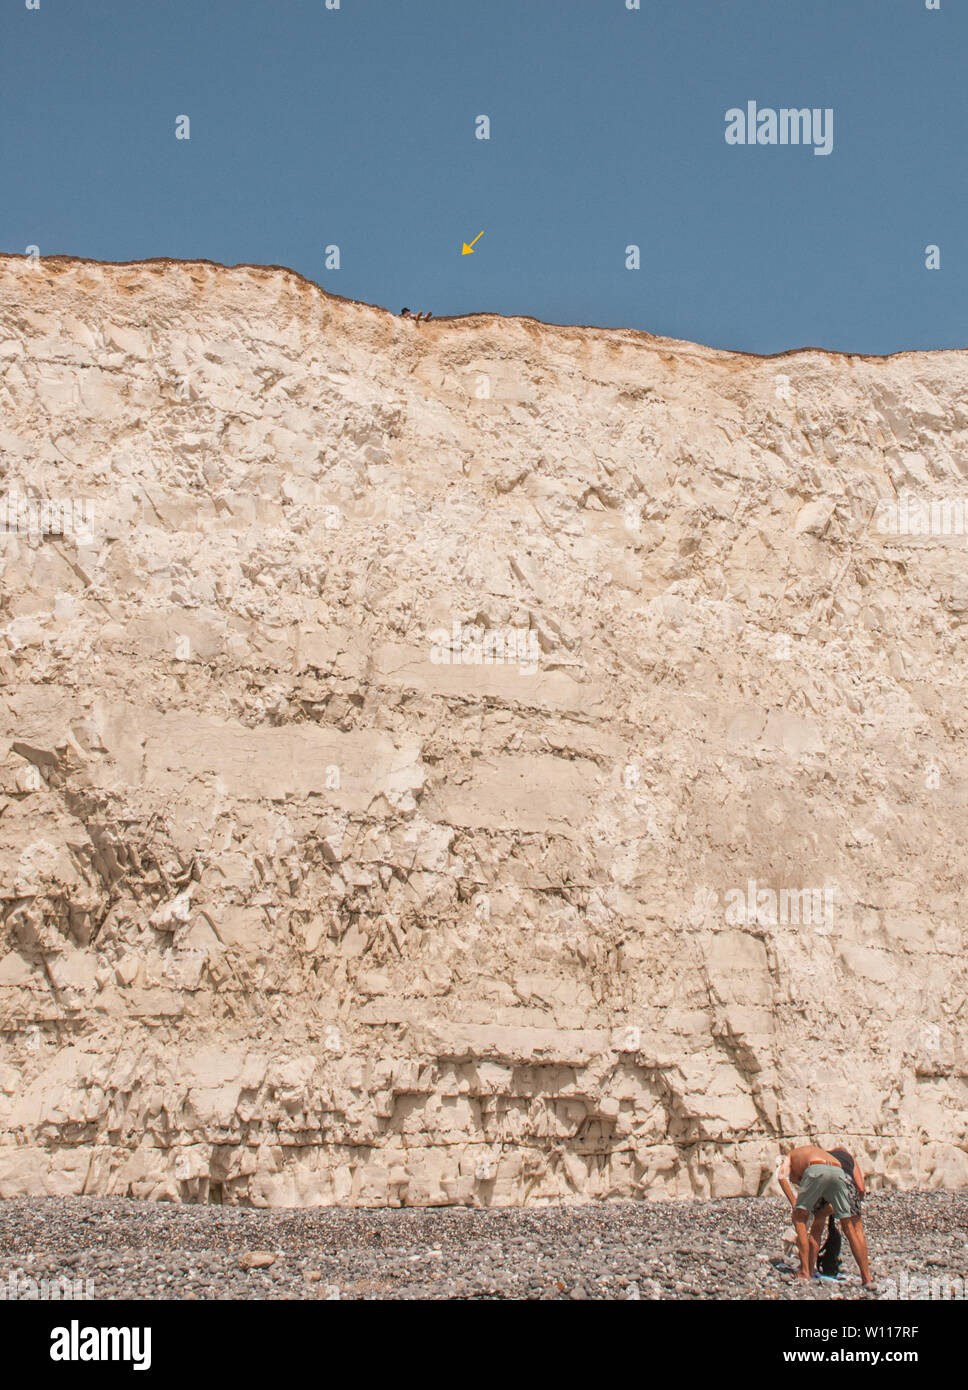 Birling Gap, Eastbourne, East Sussex, UK 28th June 2019. Look carefully. Top of cliff, feet over edge .Some seem unaware of the fragility & undercutting along the chalk cliffs. Rock falls occuring frequently. It is not safe on the edge. Please keep safe. Stock Photo